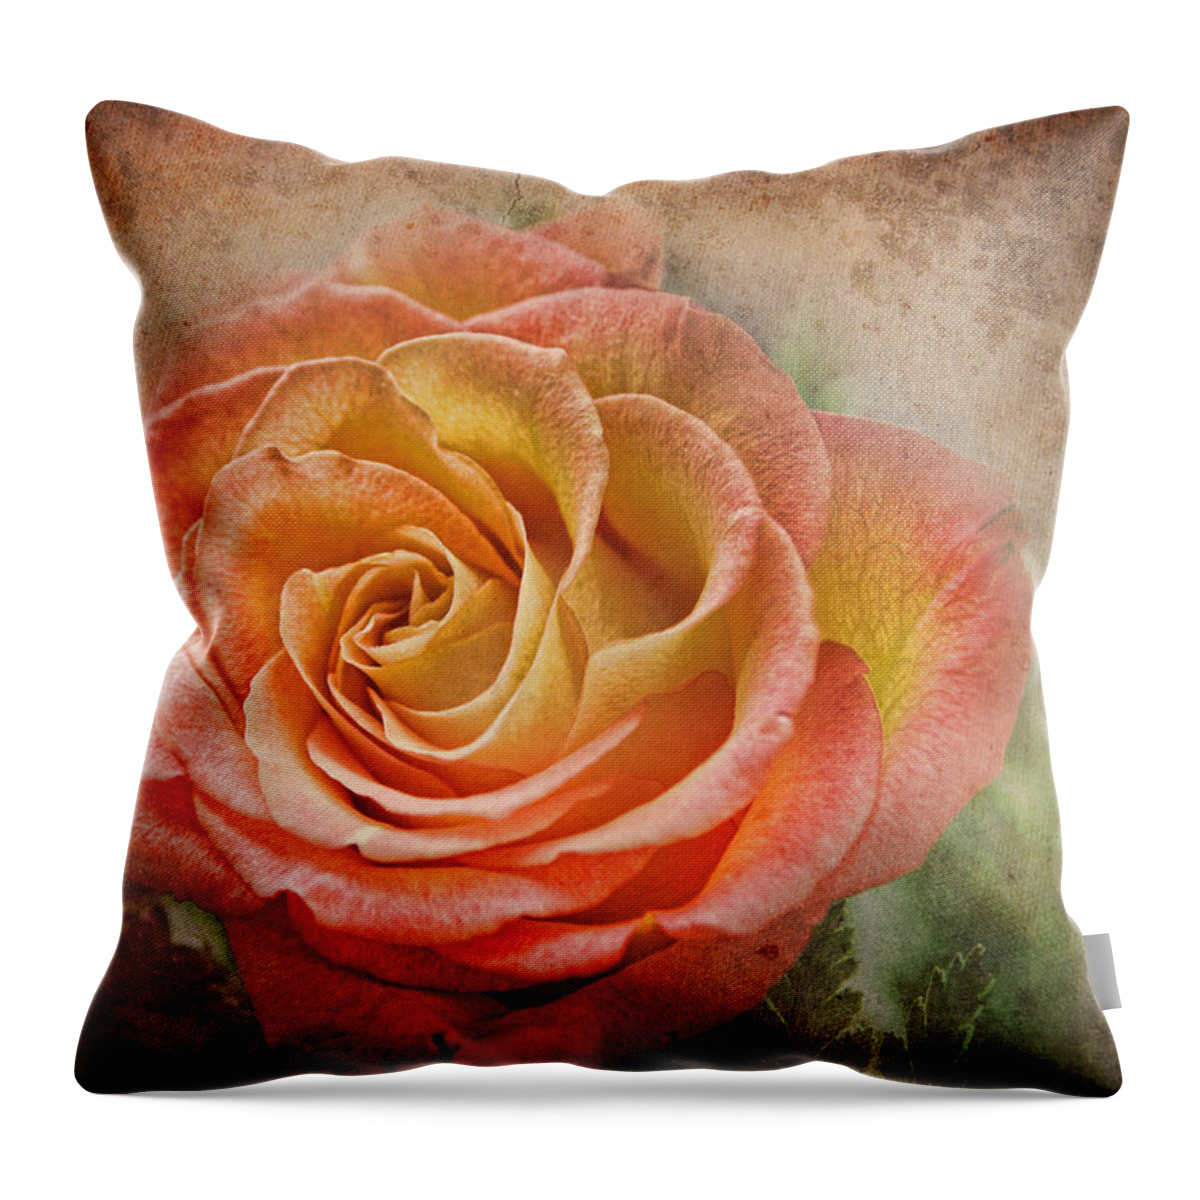 Rose Throw Pillow featuring the photograph Orange Rose by Norma Warden